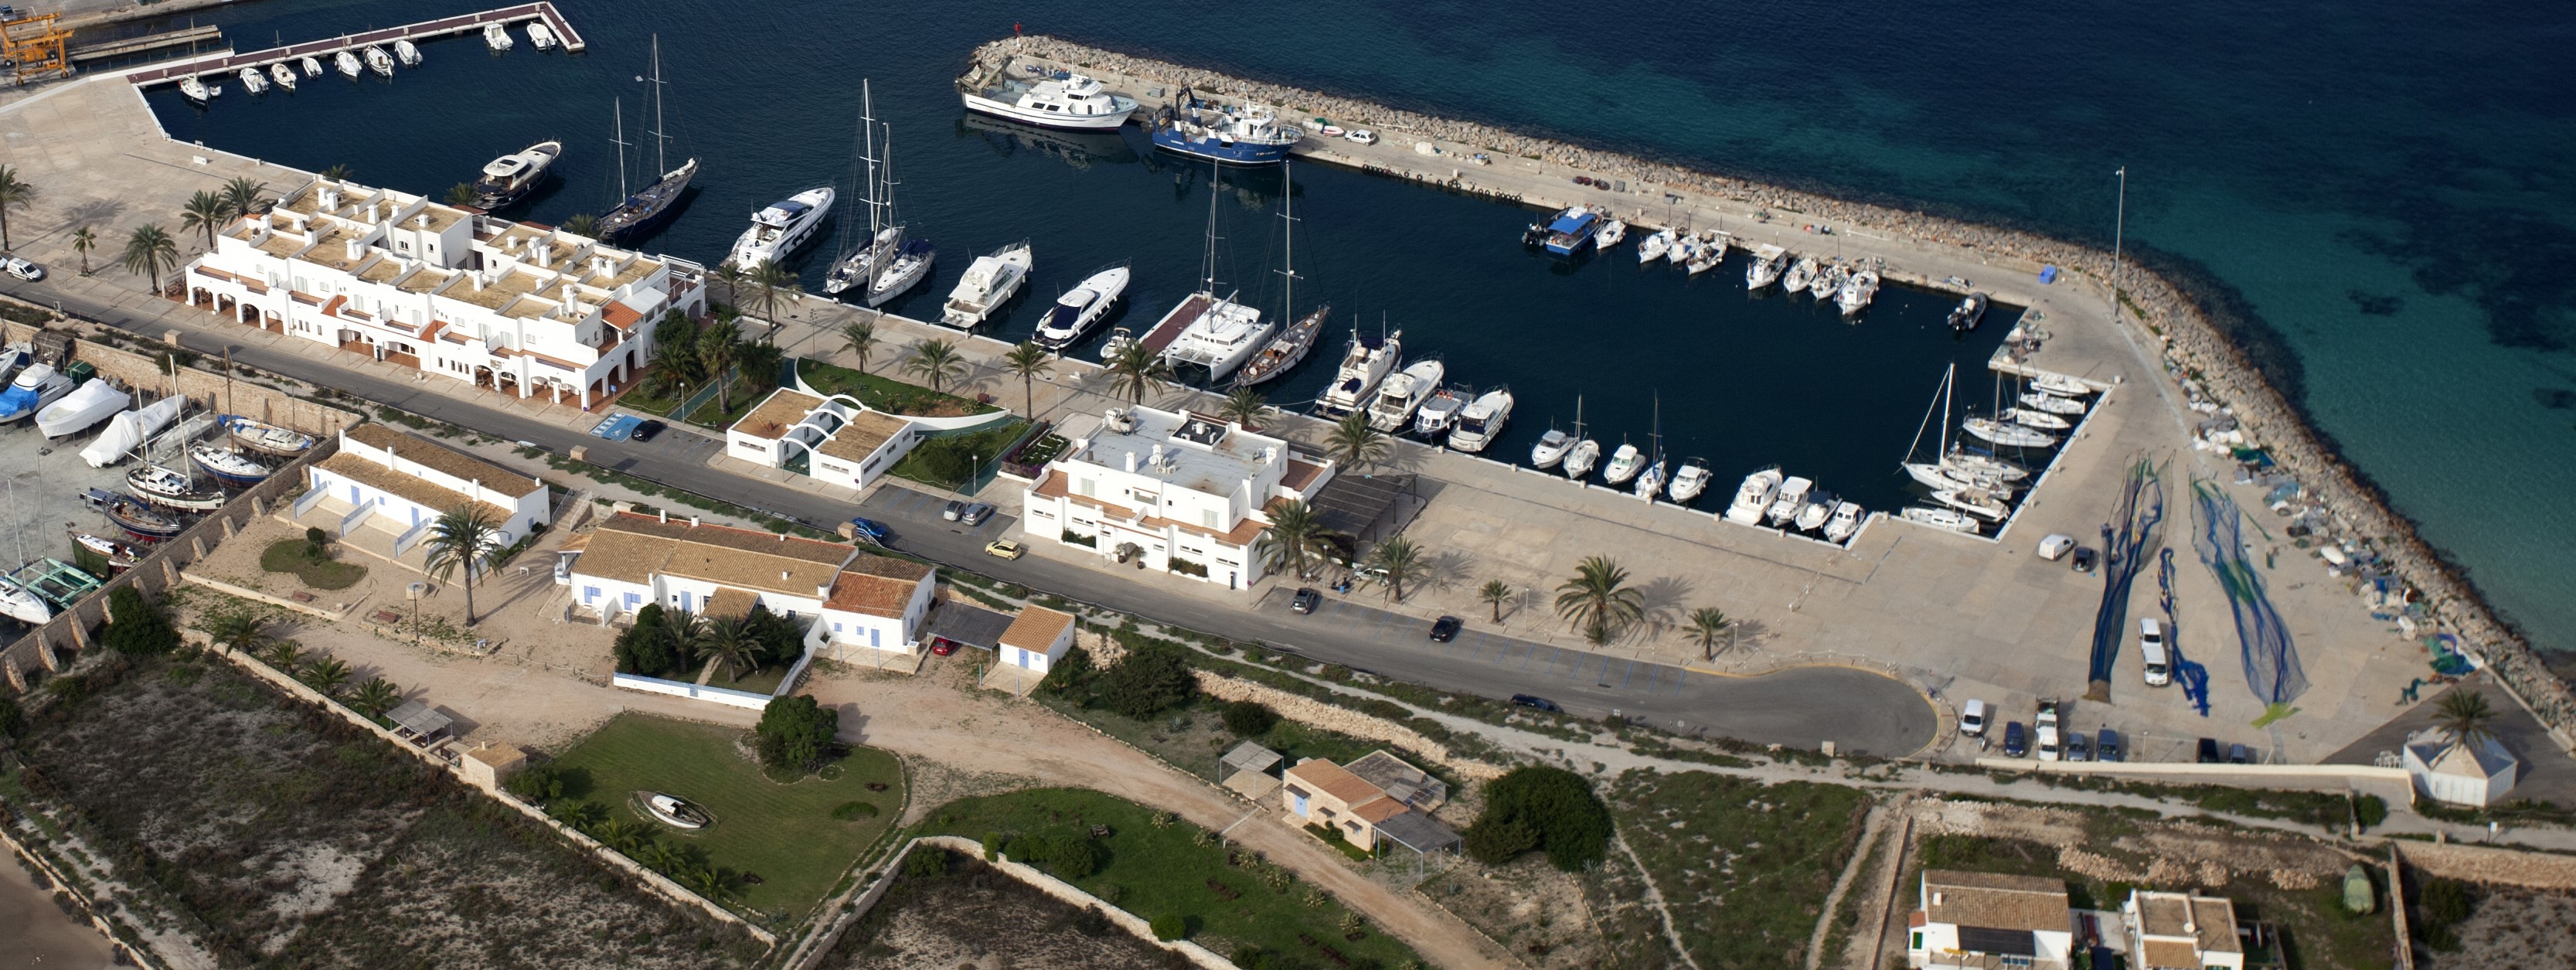 The APB (Port Authority of the Balearic Islands) approves the terms and conditions of the public tender for the management of moorings in the docks for smaller vessels at the port of La Savina